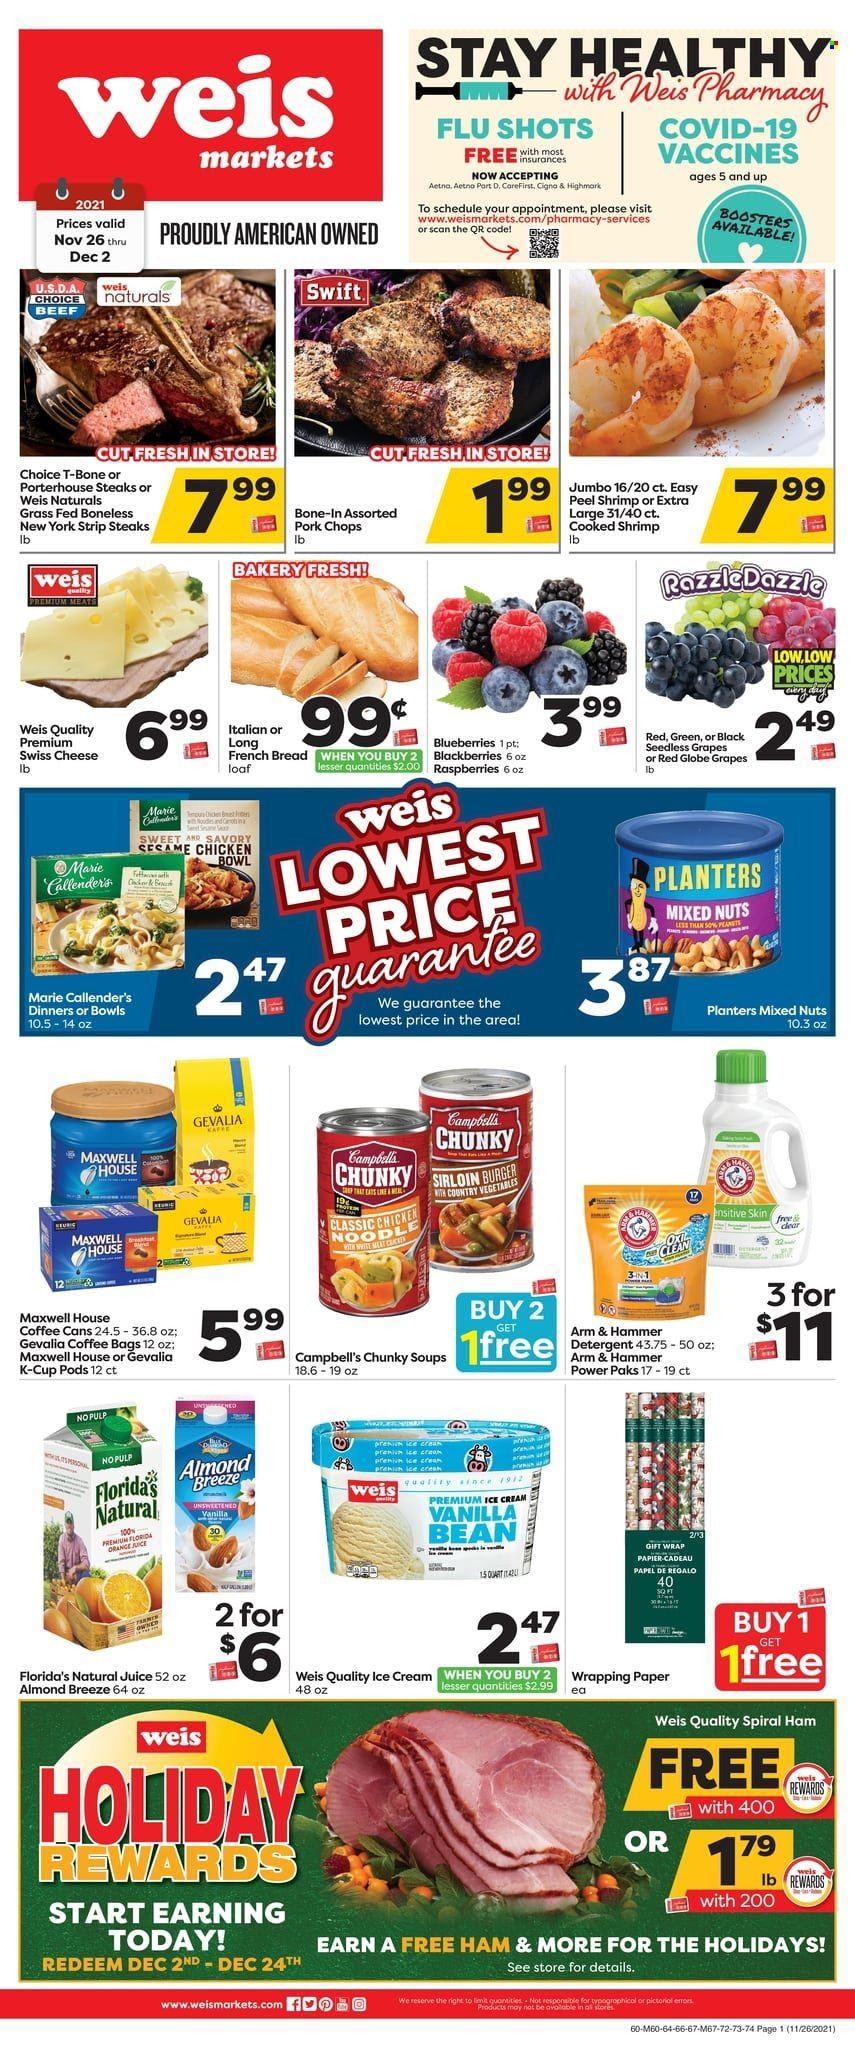 thumbnail - Weis Flyer - 11/26/2021 - 12/02/2021 - Sales products - seedless grapes, bread, french bread, blackberries, blueberries, grapes, Red Globe, beef meat, t-bone steak, steak, portehouse steak, striploin steak, hamburger, pork chops, pork meat, shrimps, Campbell's, noodles, Marie Callender's, spiral ham, swiss cheese, cheese, Almond Breeze, ice cream, Florida's Natural, ARM & HAMMER, mixed nuts, Planters, juice, Maxwell House, coffee, coffee capsules, K-Cups, Gevalia, detergent, gift wrap, wrapping paper. Page 1.